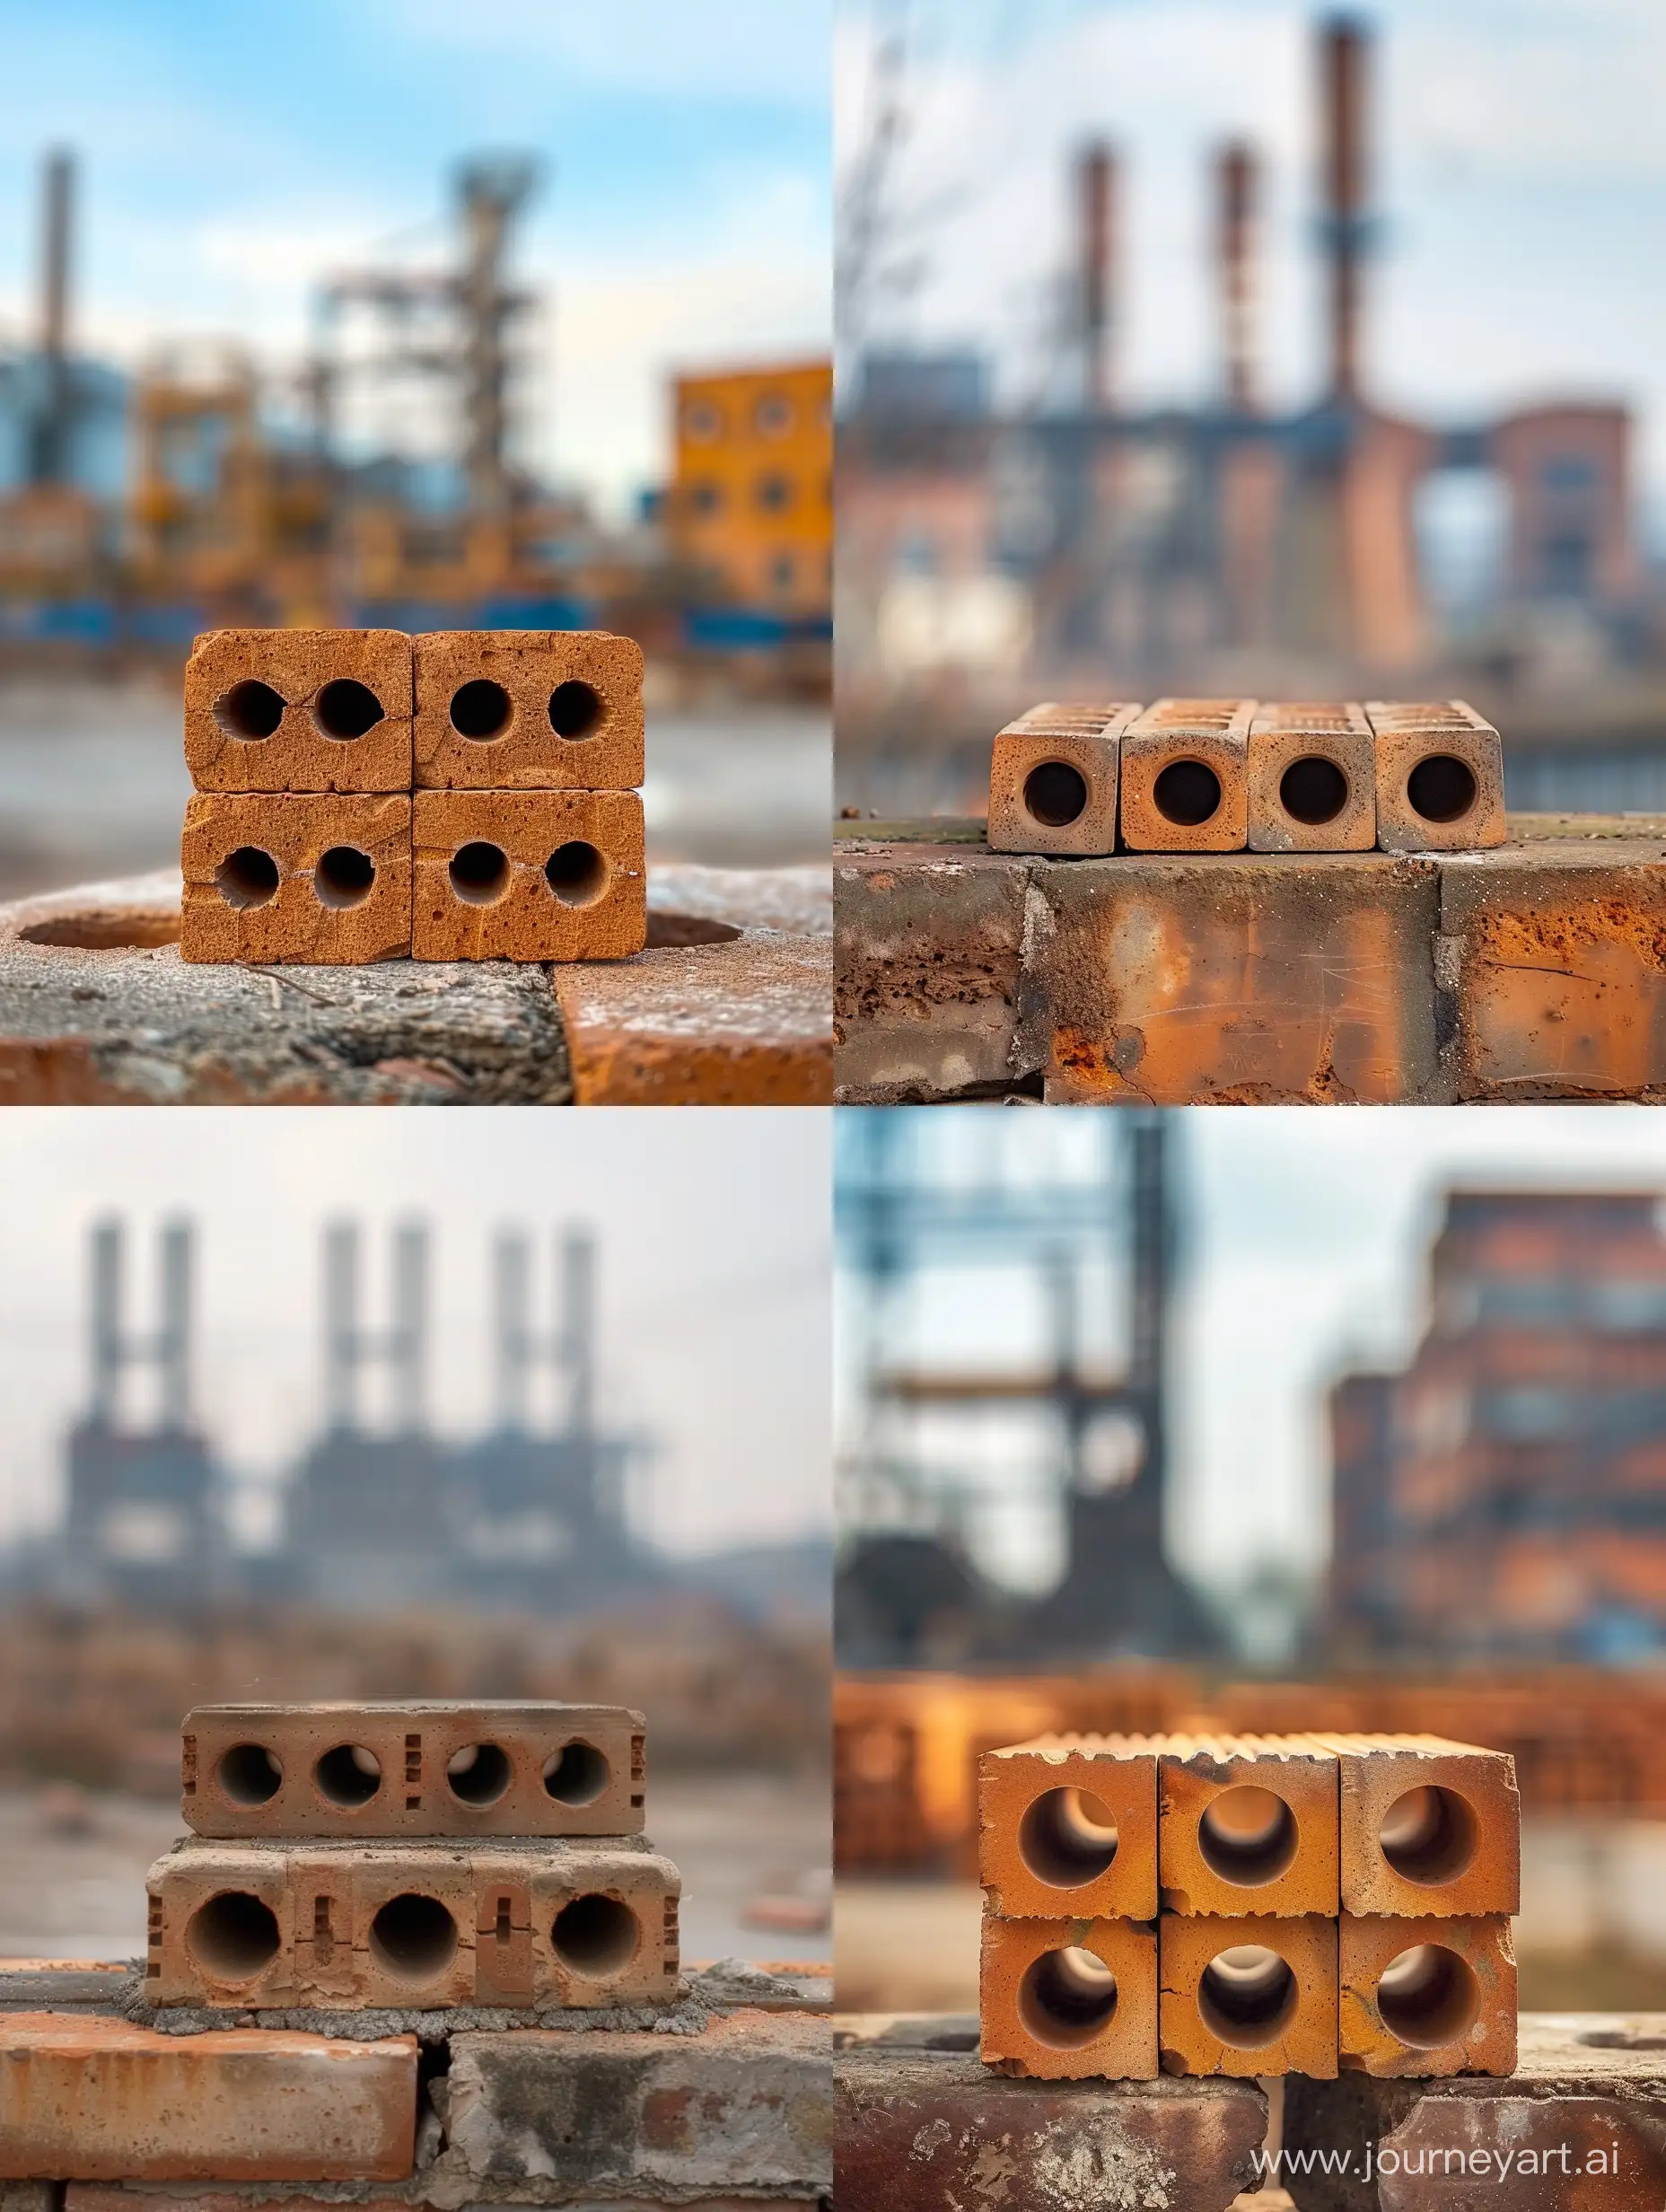 Industrial-Aesthetics-Stacked-Grooved-Bricks-in-Factory-Setting